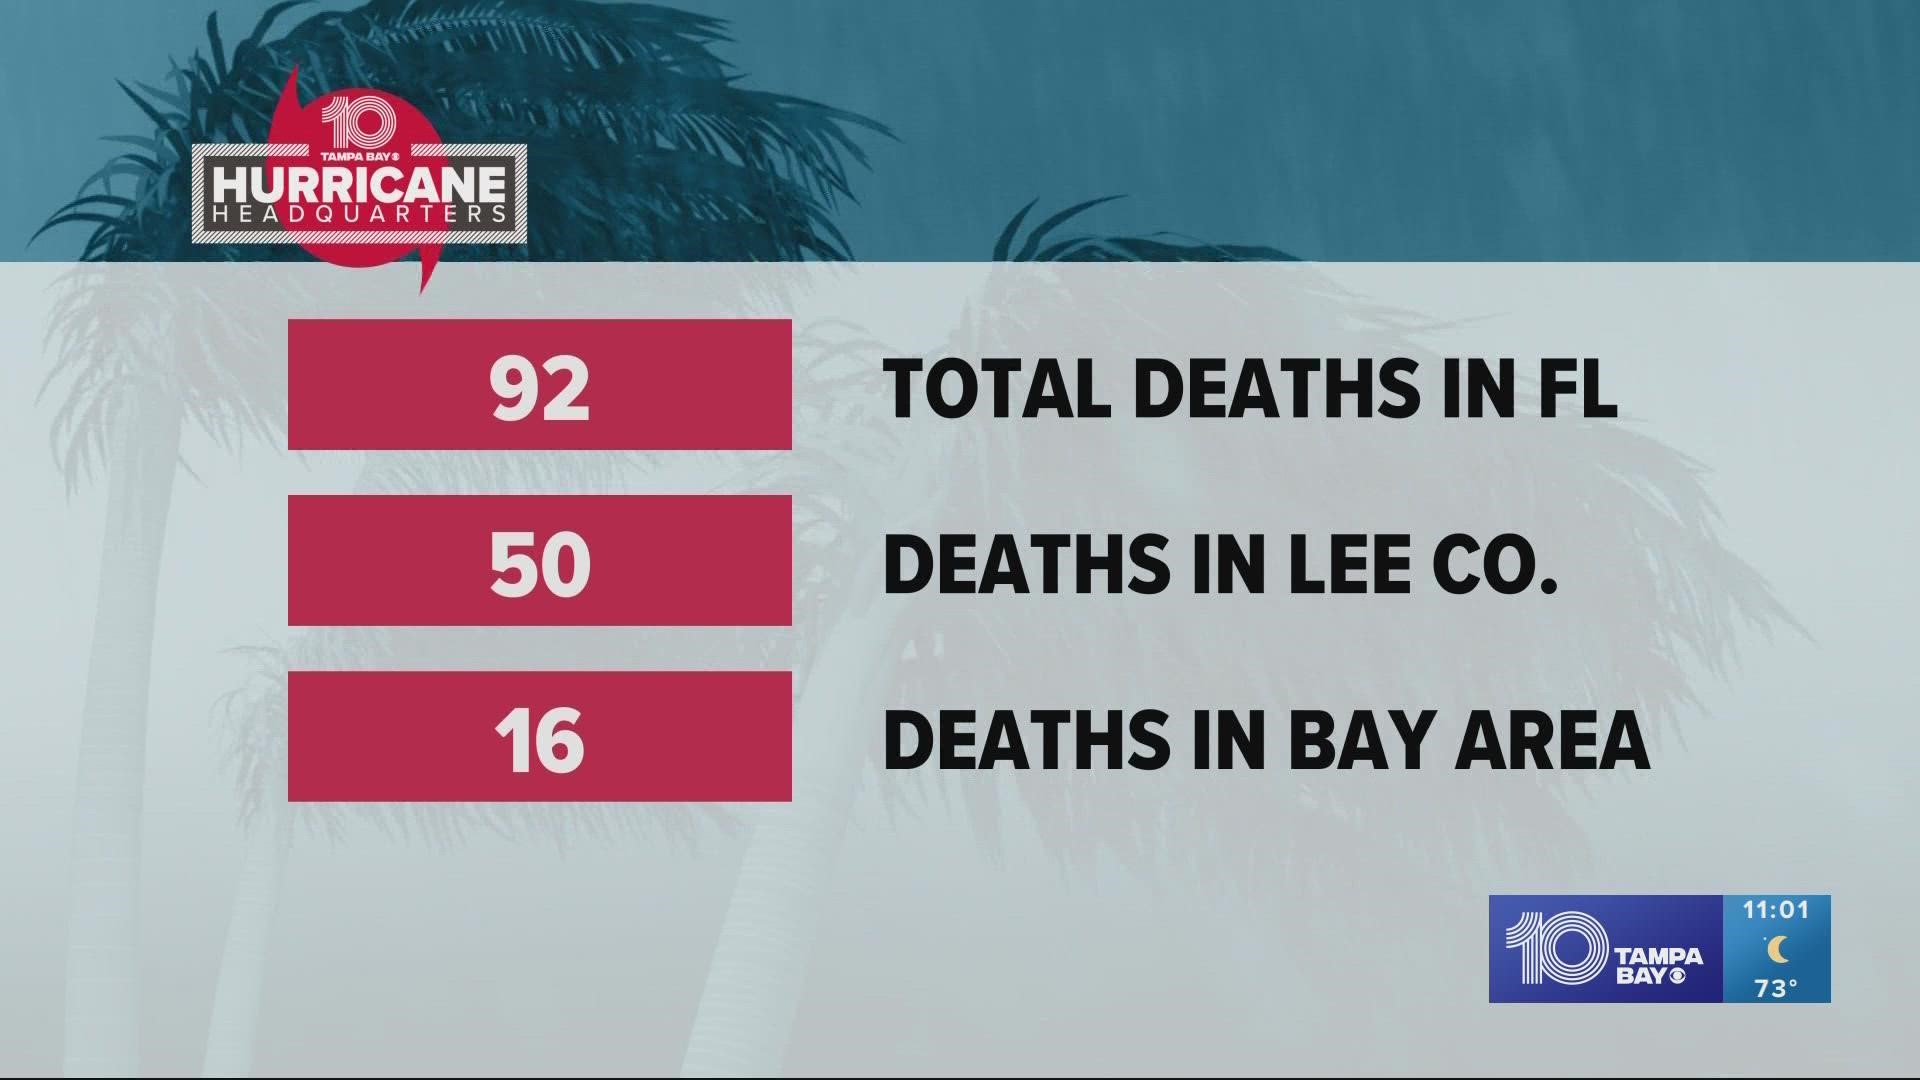 Twelve of those deaths are in the Tampa Bay region.